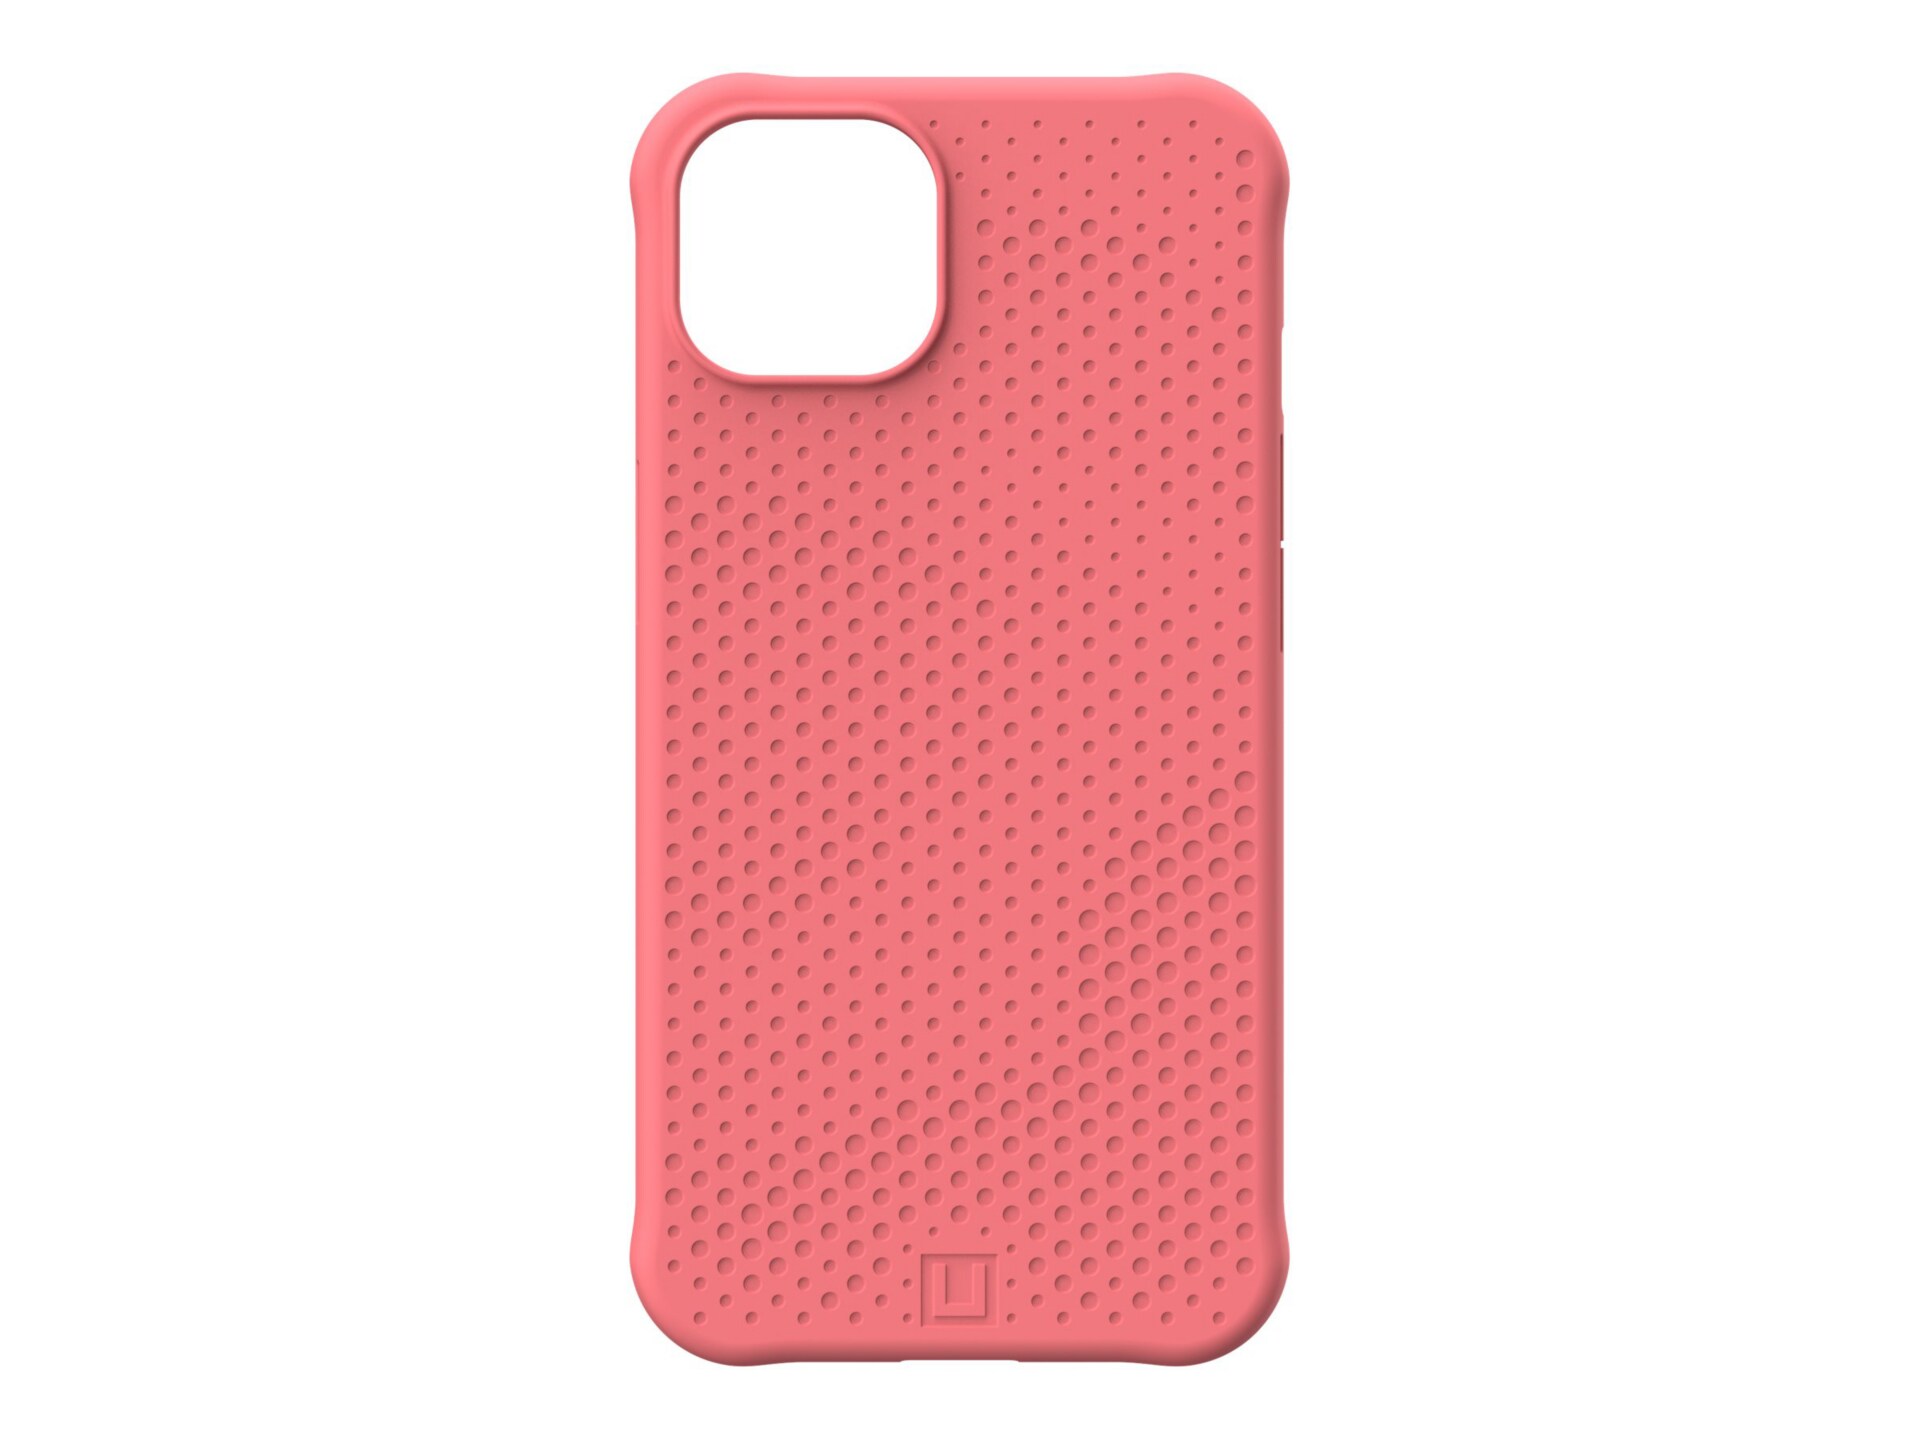 [U] Protective Case for iPhone 13 5G [6.1-inch] - Dot Clay - back cover for